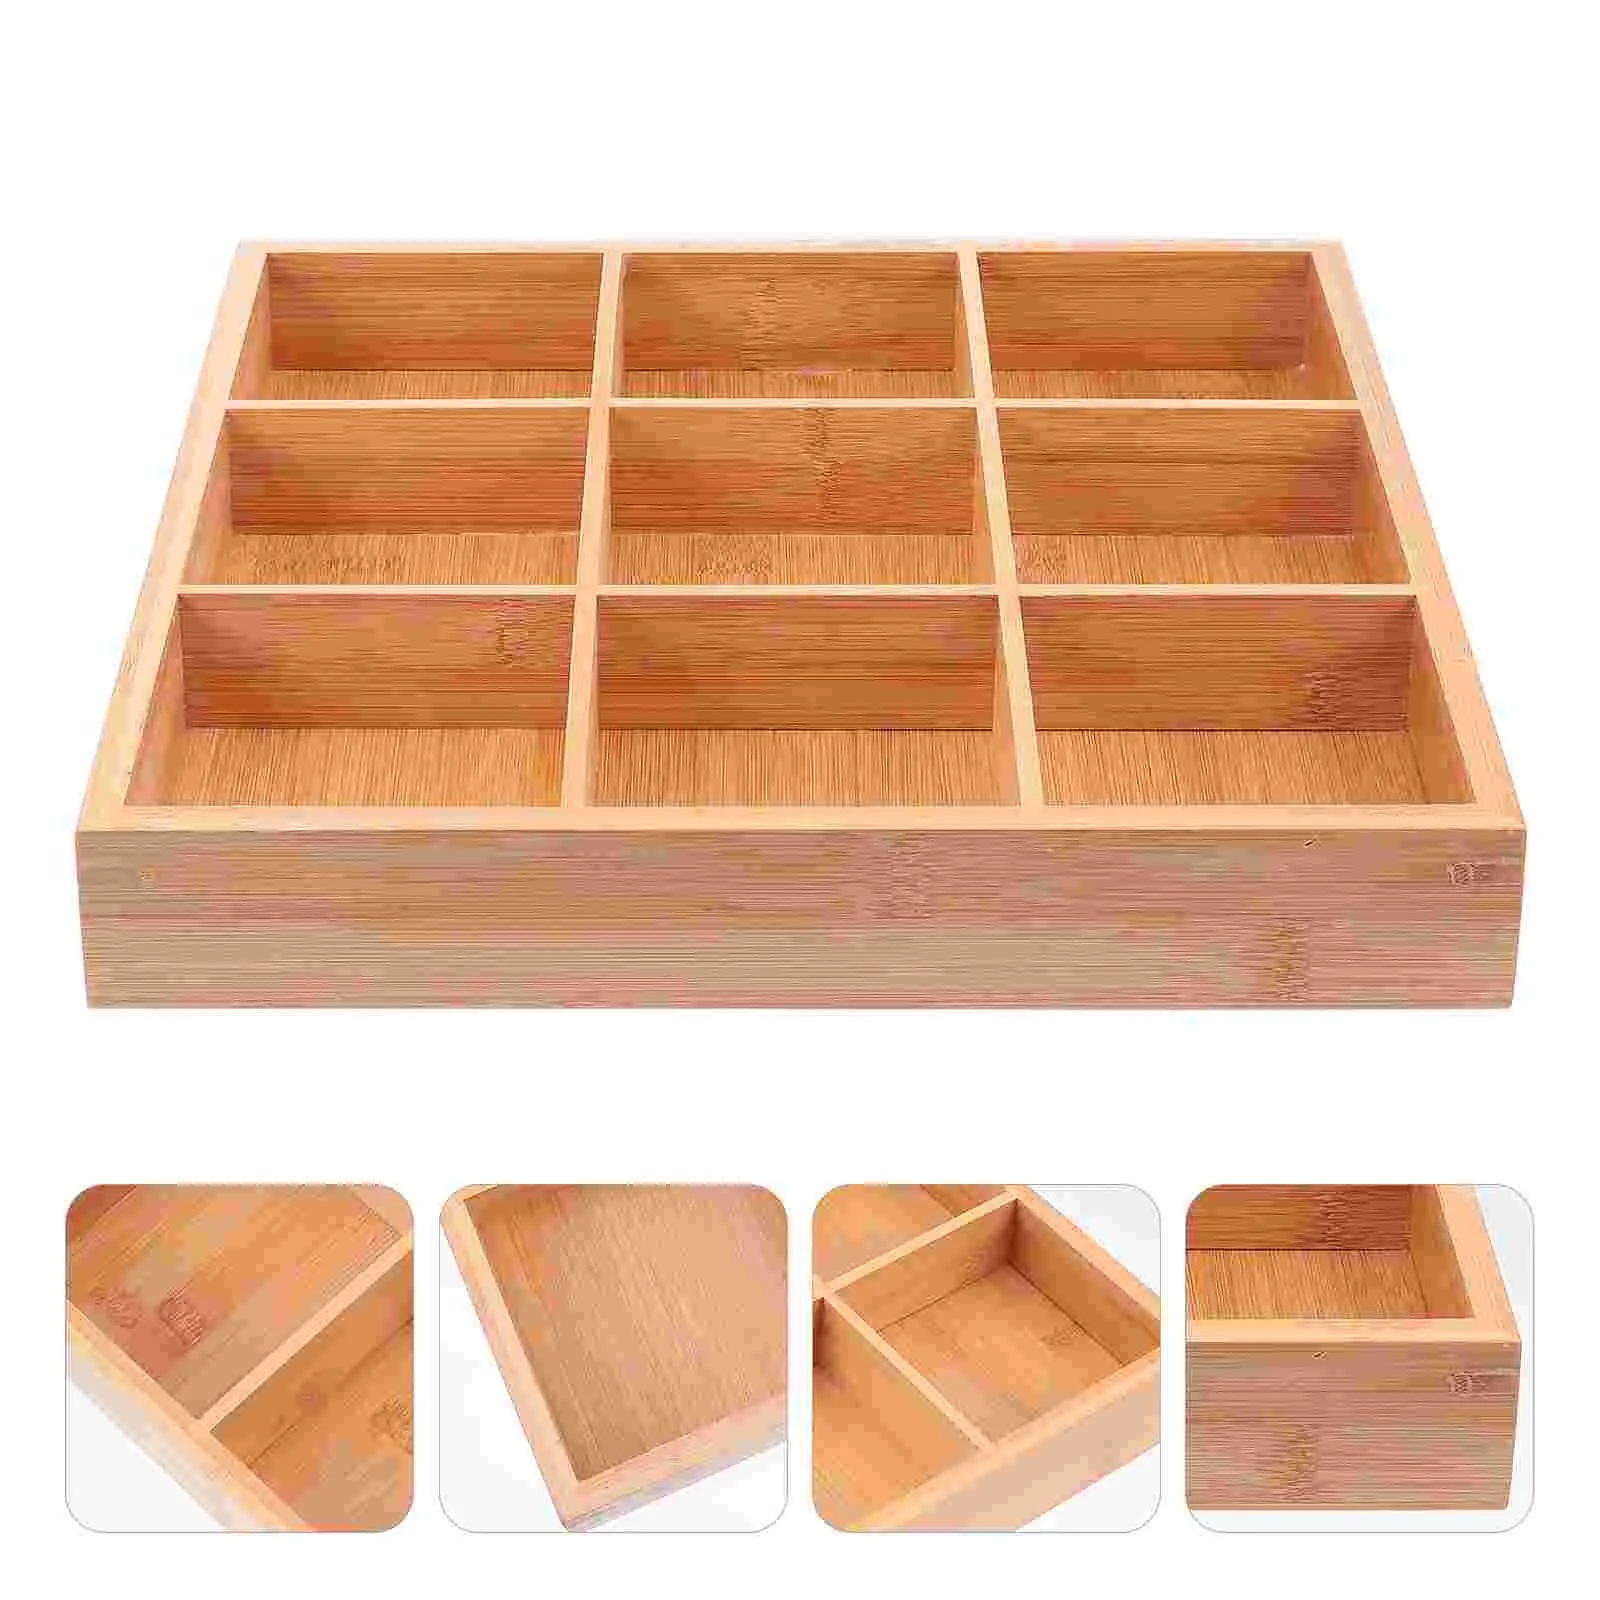 

Veggie Trays Divided Platter Bamboo Serving Tray Wooden Food Server 9 Compartment Candy Bowl Appetizer Sushi Plate Japanese Taco